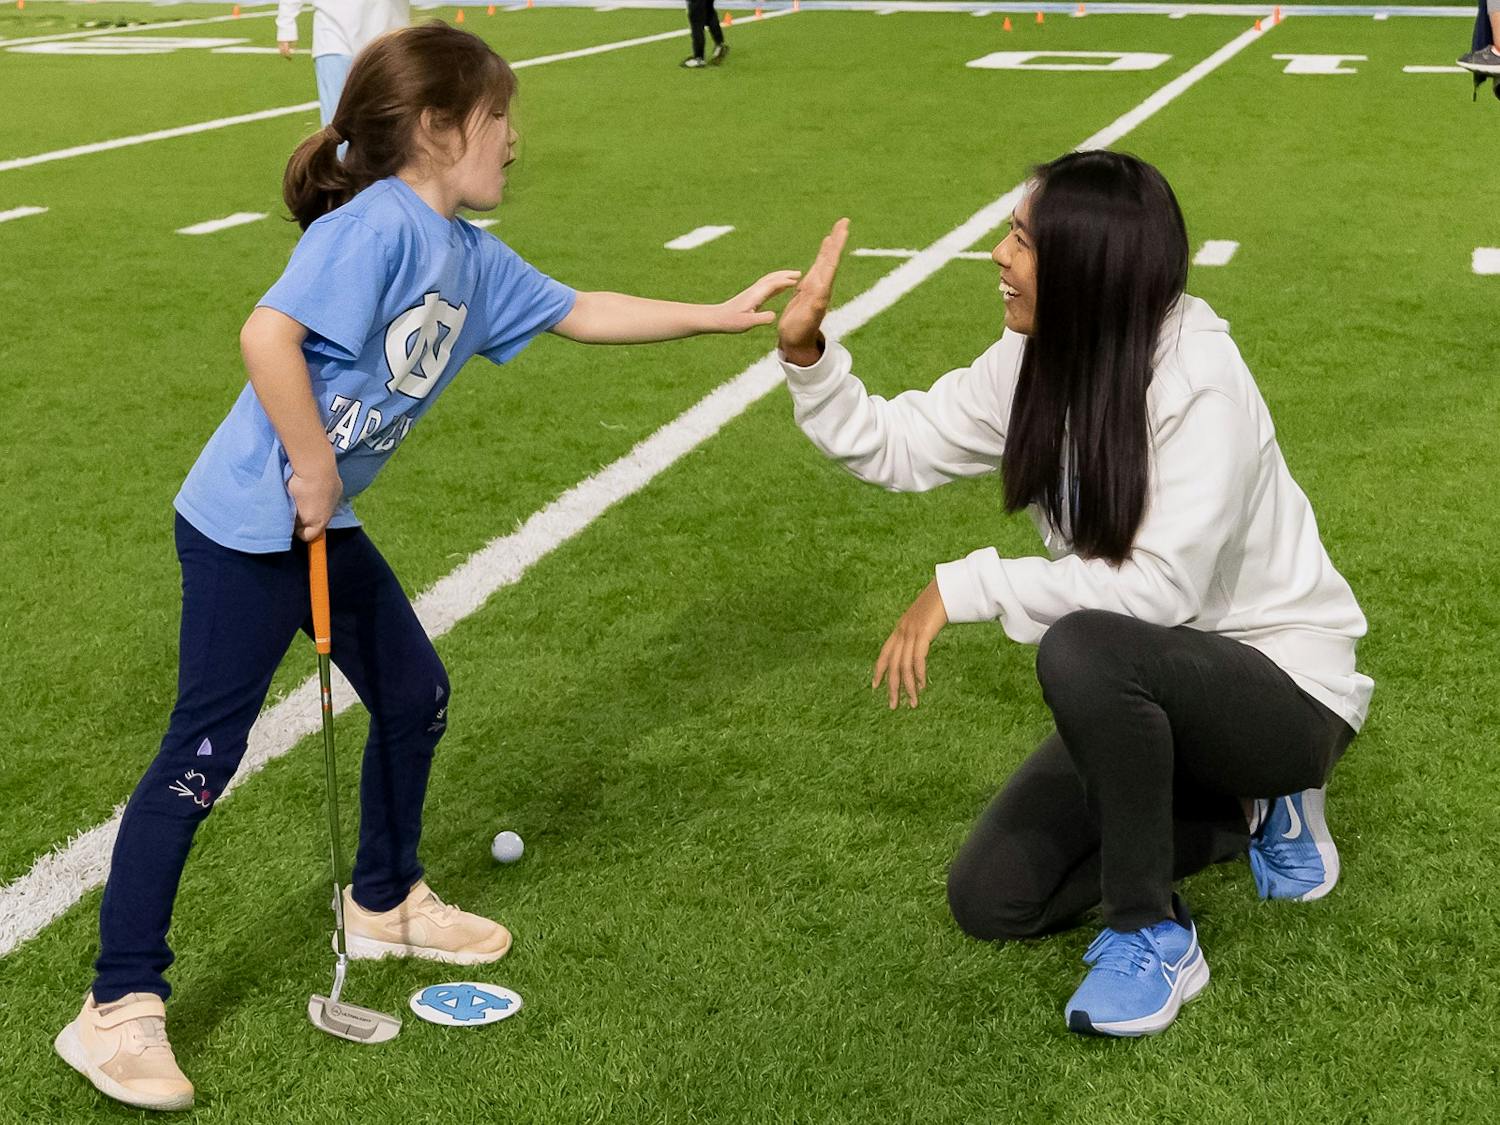 UNC first-year golfer Inez Ng high fives Sara Ludner at the National Girls & Women in Sports Day event held at the Bill Koman Practice on Sunday, Jan. 22, 2023.